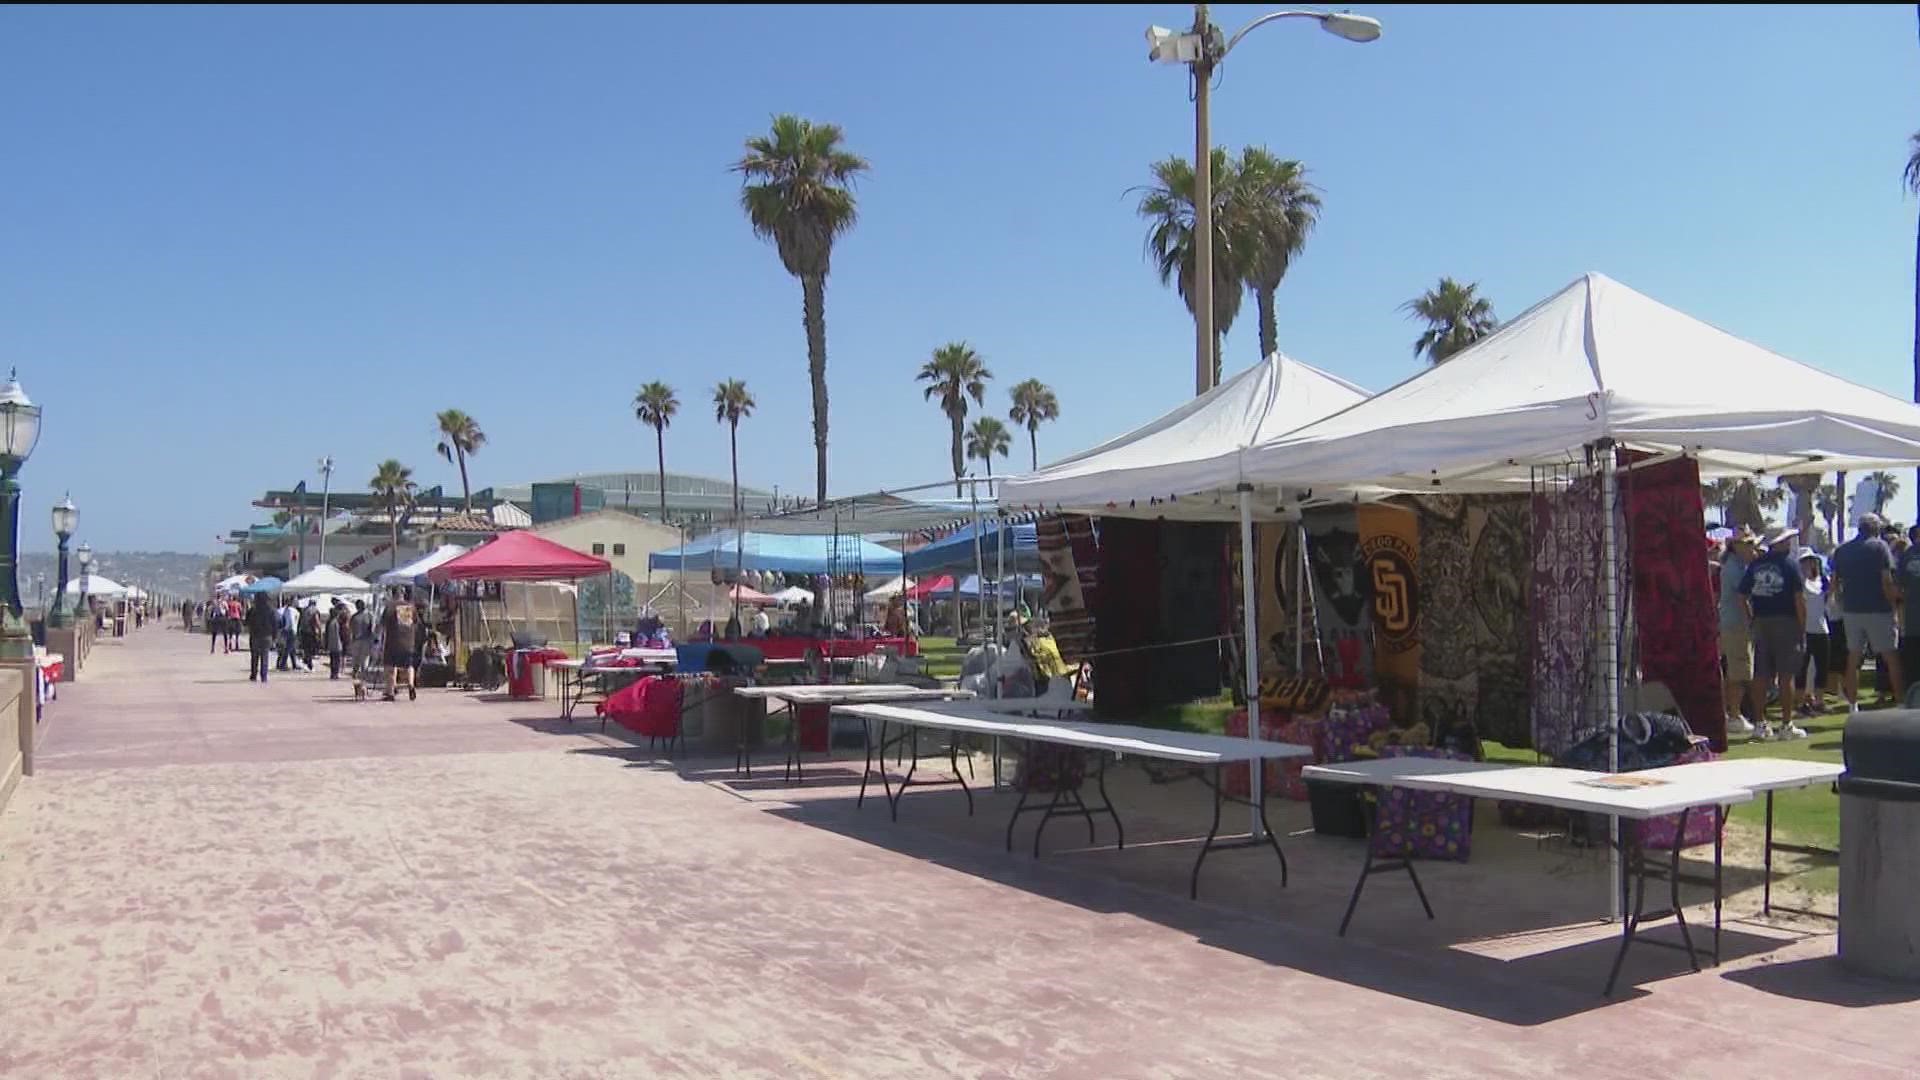 Town council and residents say street vendors are ruining the beach community